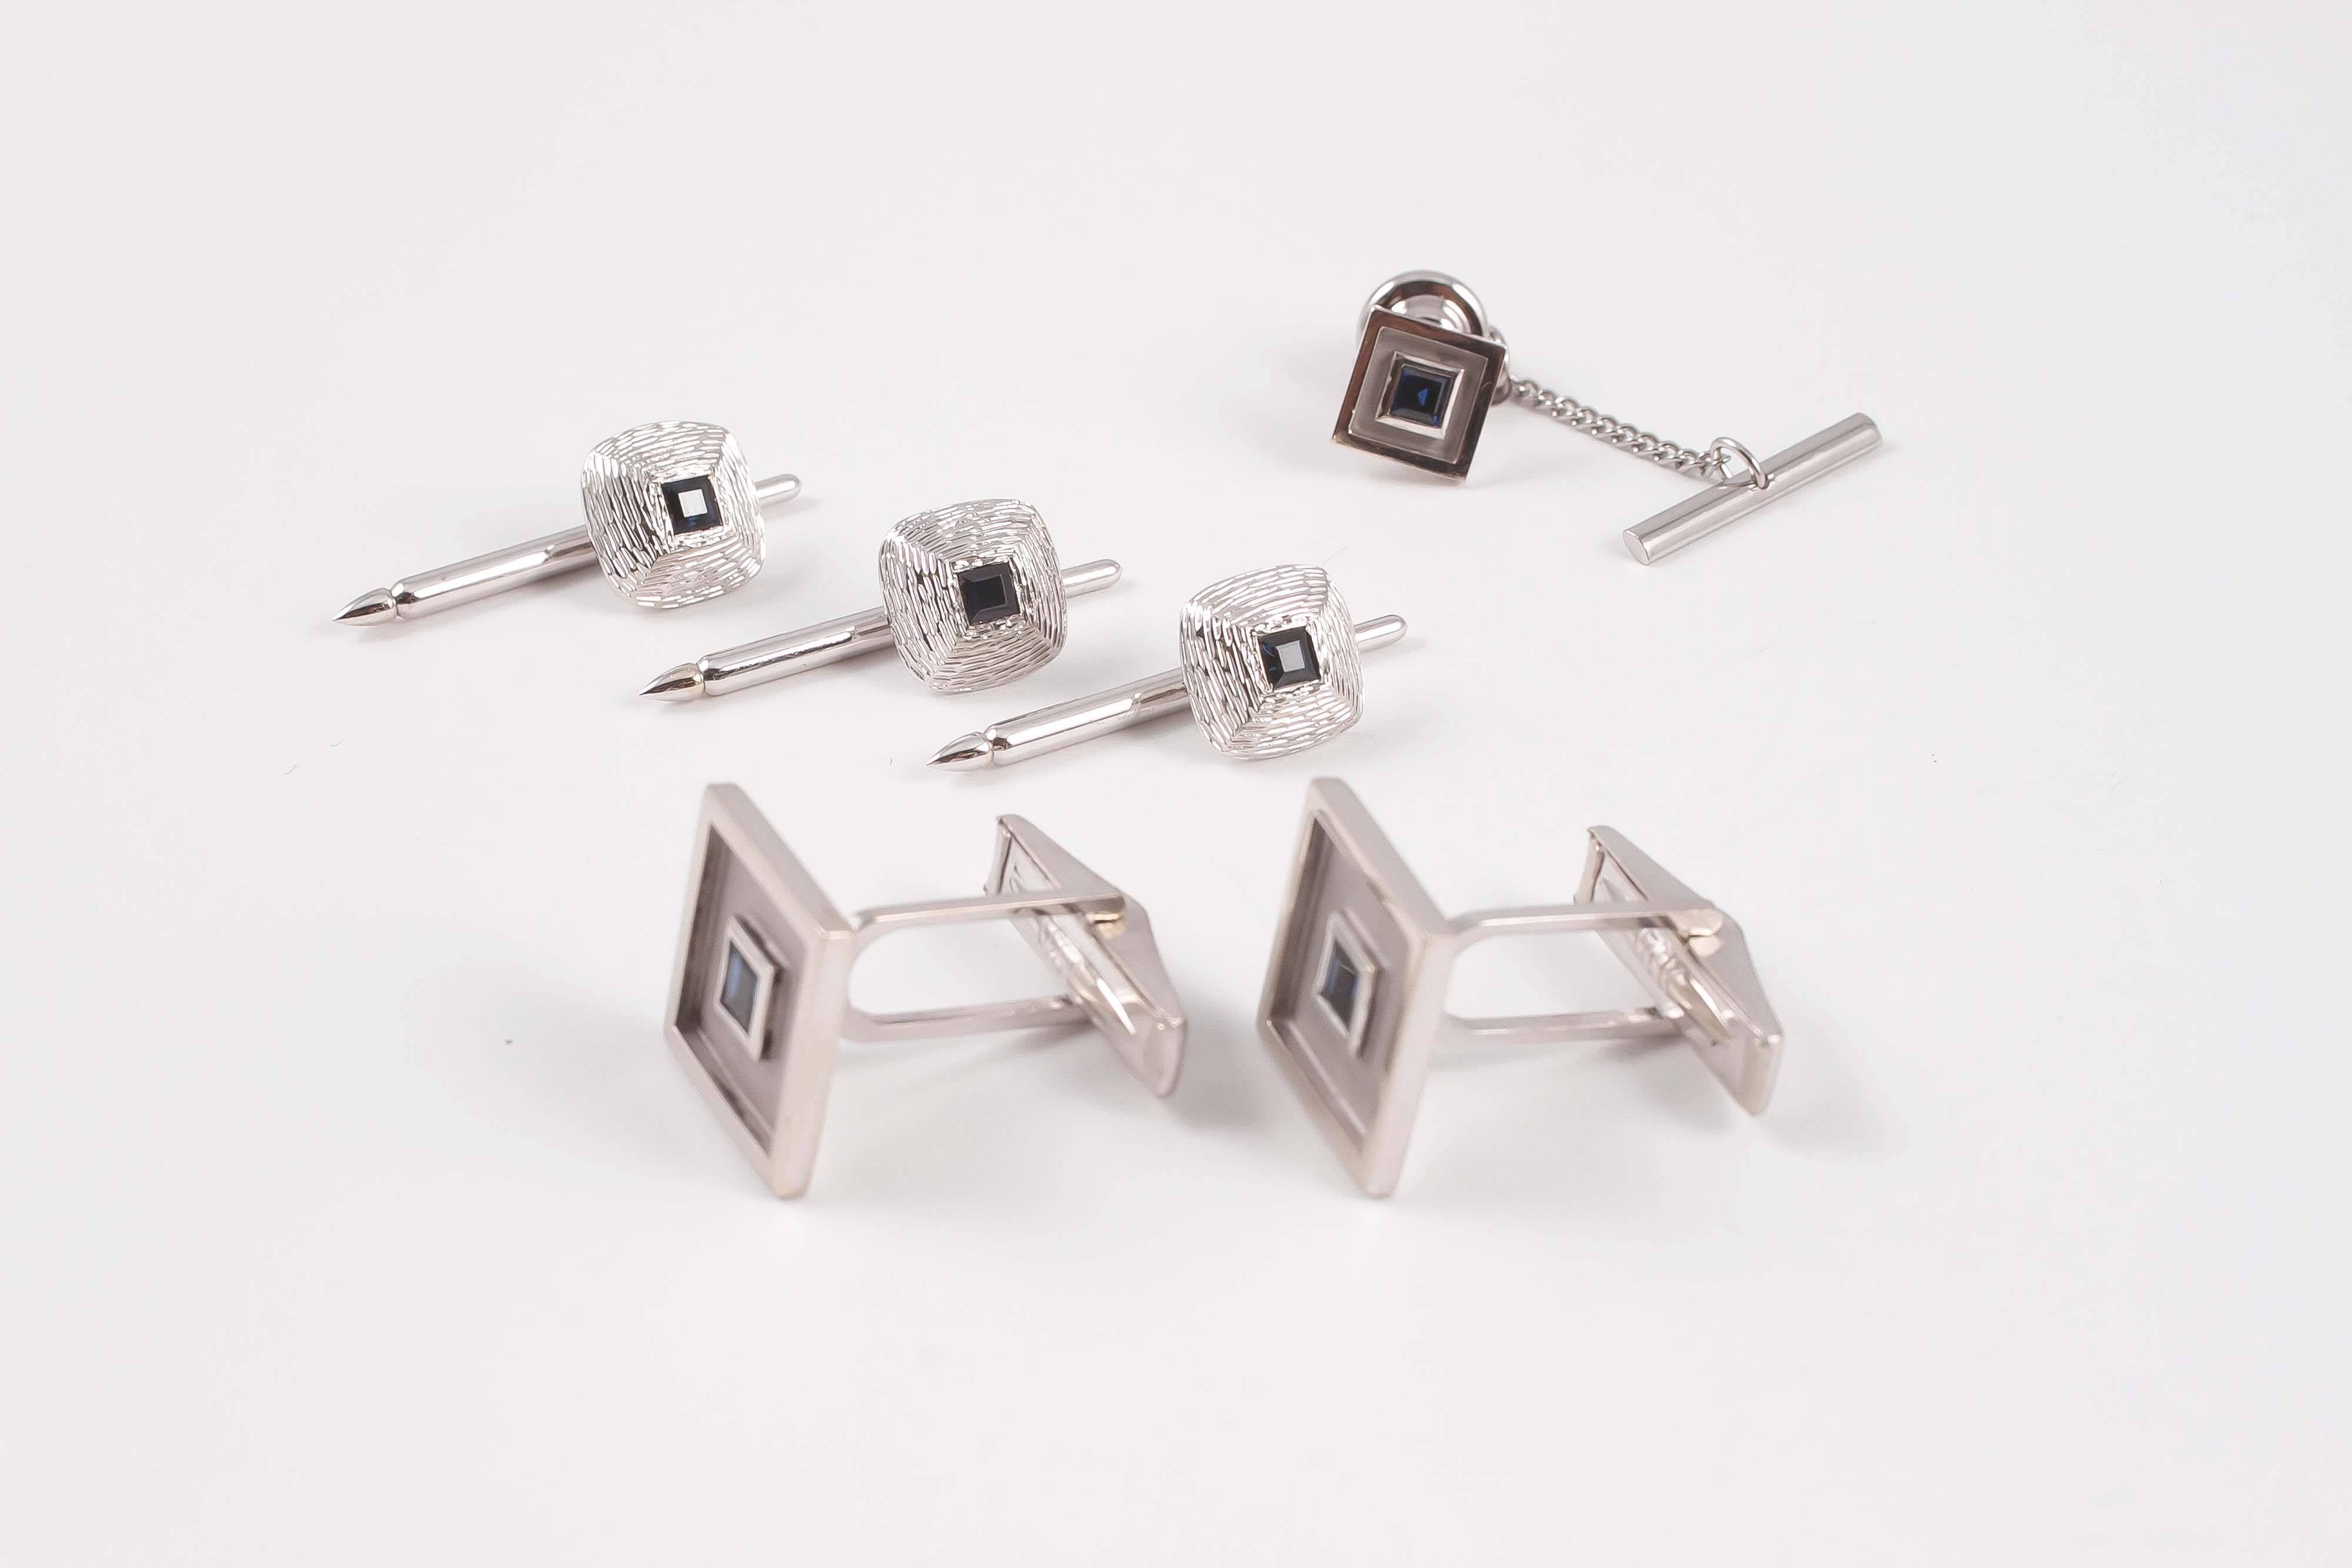 The cufflinks and tie tack have a clean modern look with sapphires set into square shaped bezels. The cufflinks measure 20.00 mm square.  The shirt studs have a domed shape with a textured surface to complete the look.  